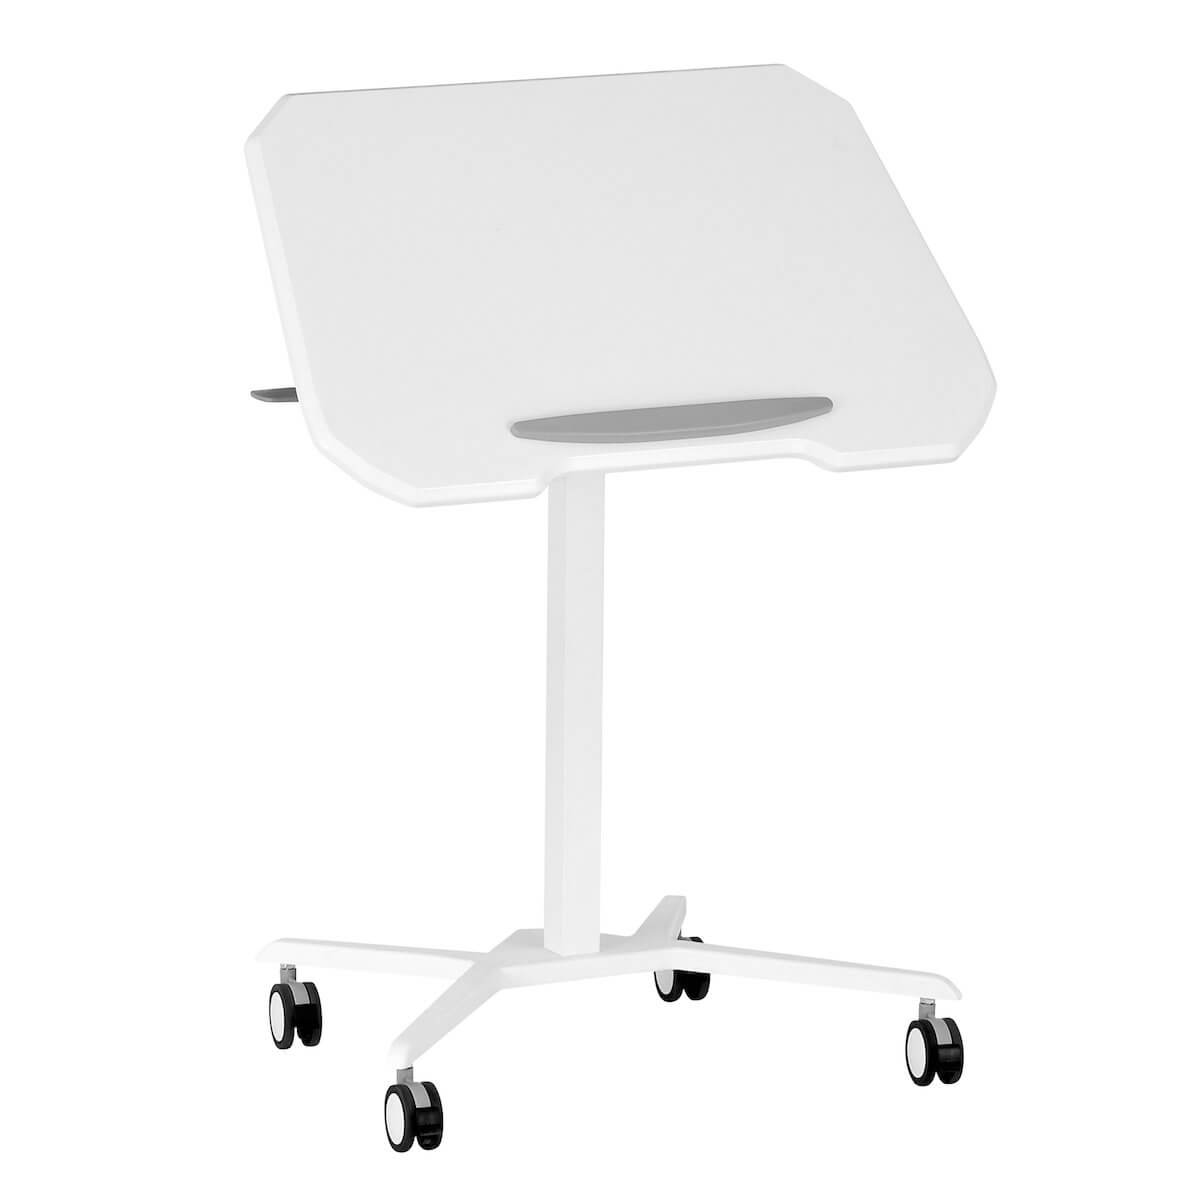 Techni Mobili White Sit to Stand Mobile Laptop Computer Stand with Height Adjustable and Tiltable Tabletop RTA-B008-WHT Angle